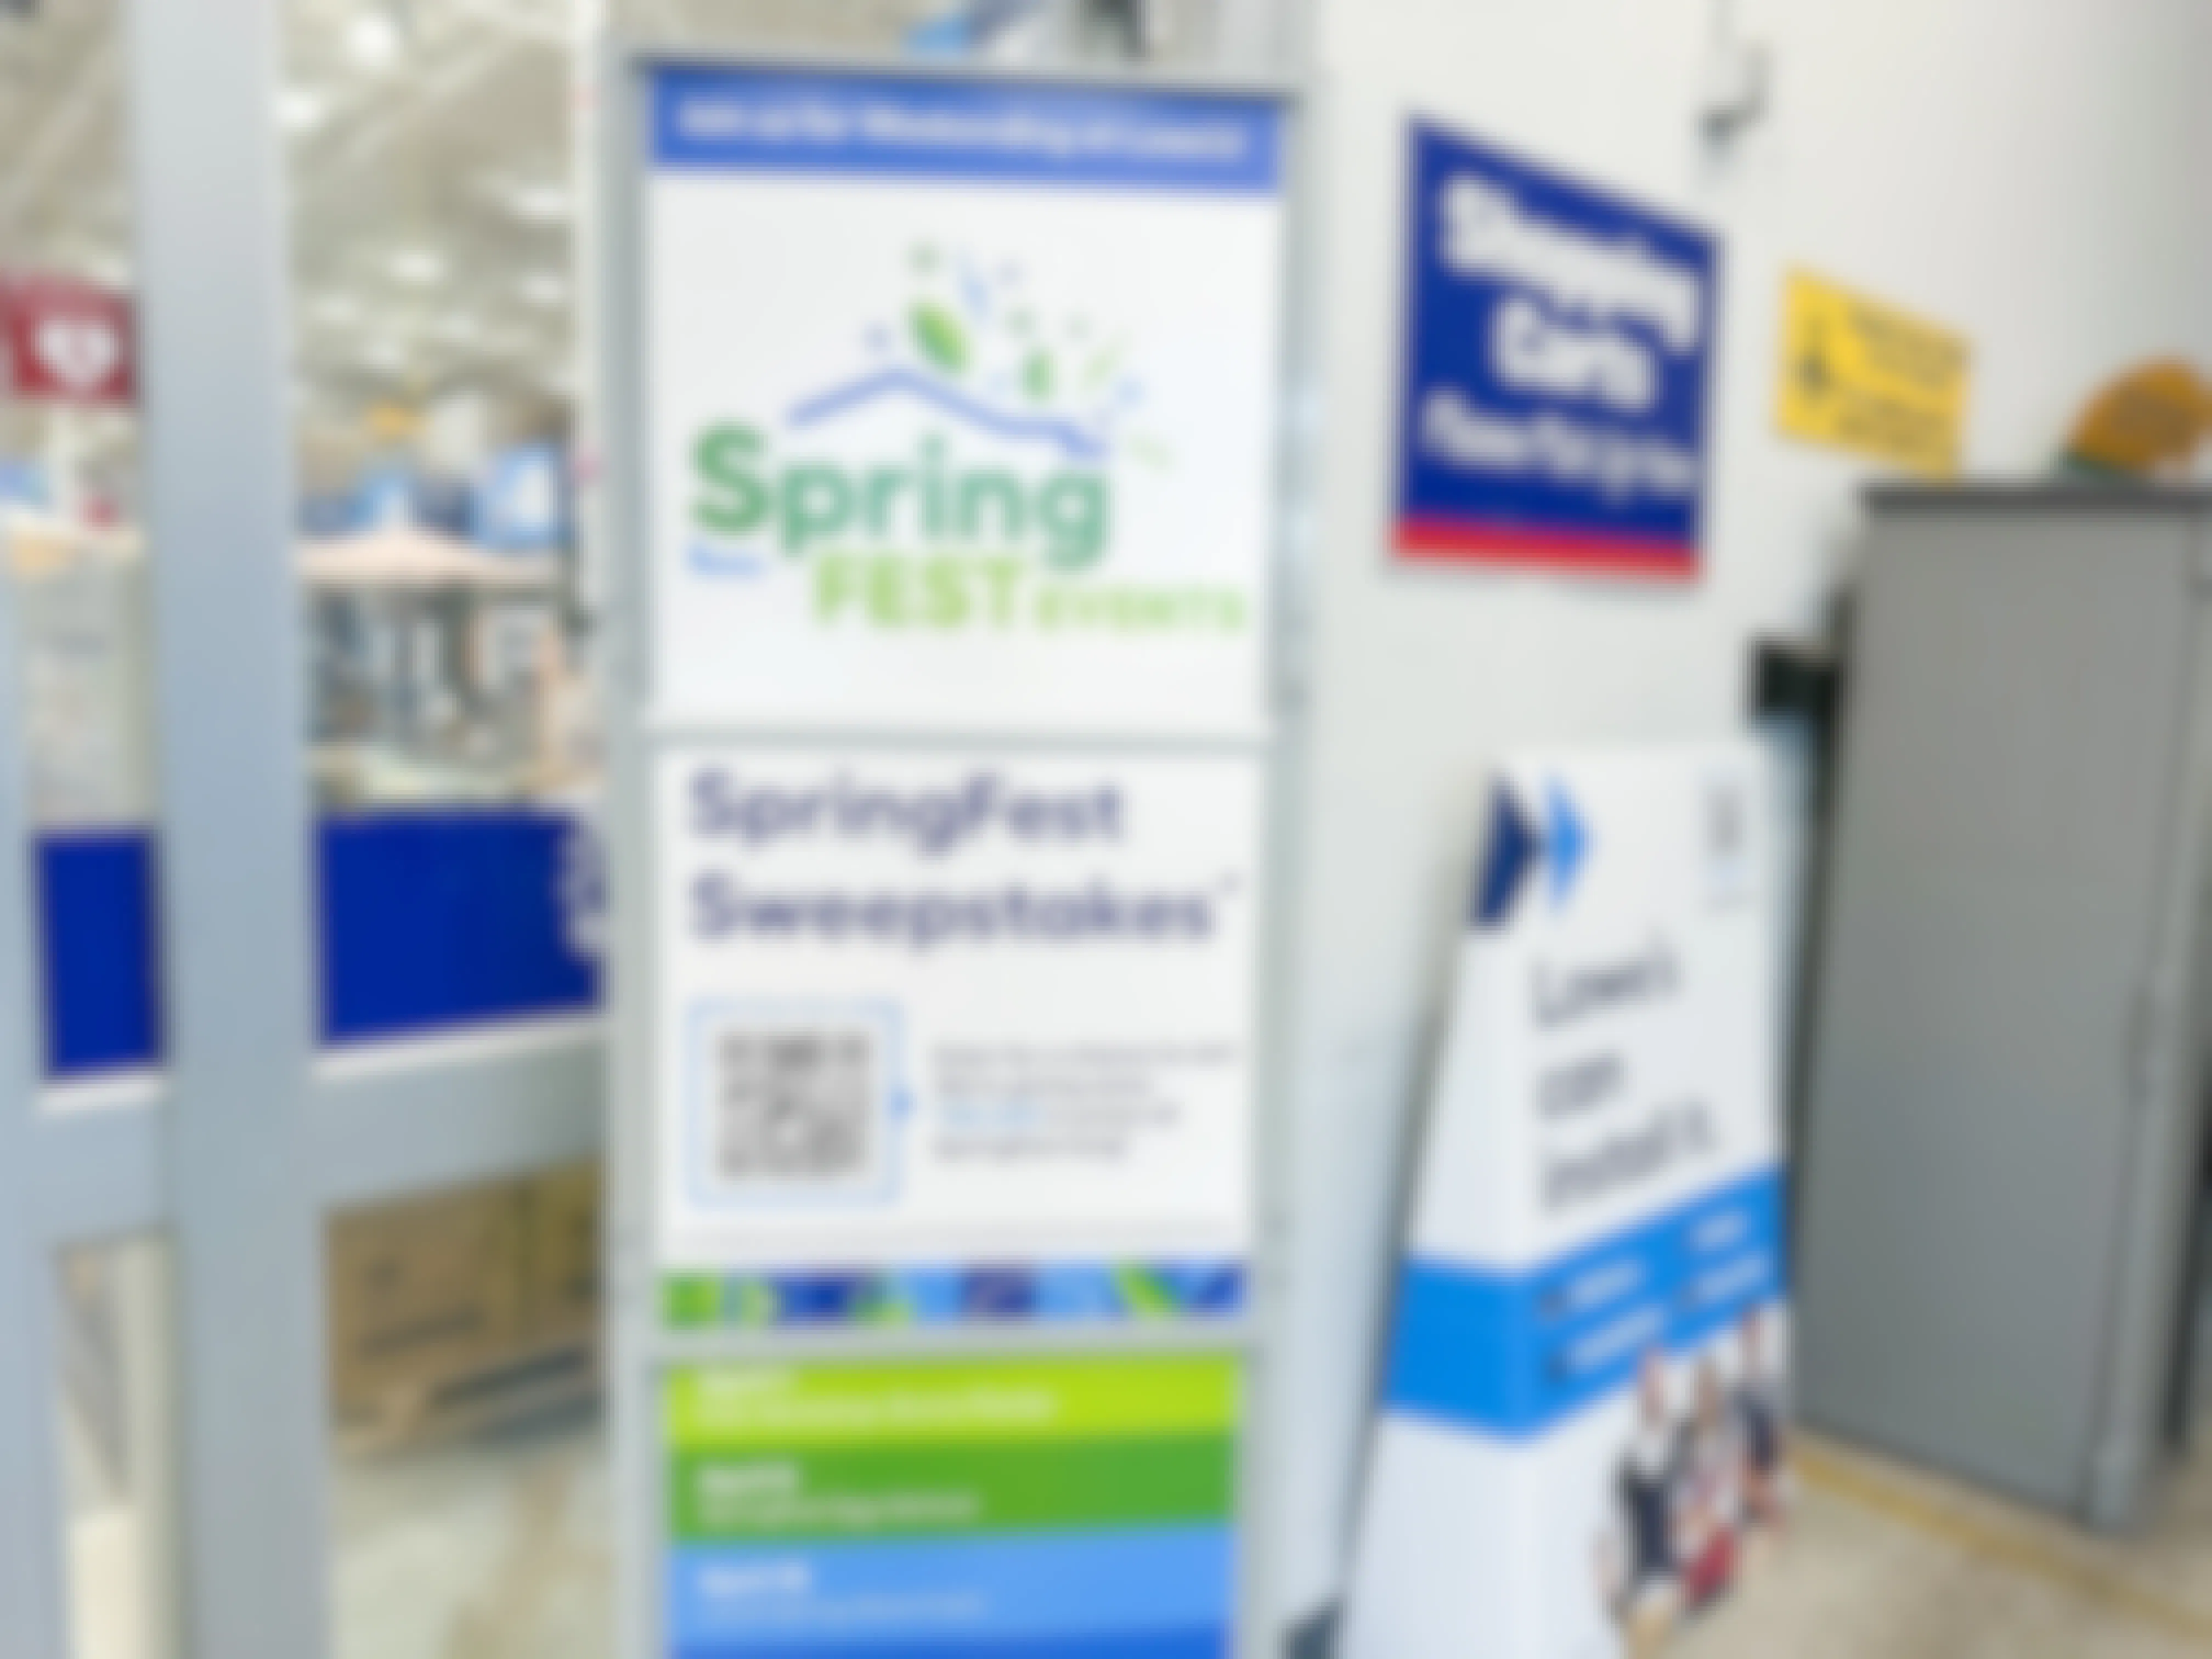 A Lowe's SpringFest 2023 sweepstakes sign in store at Lowe's